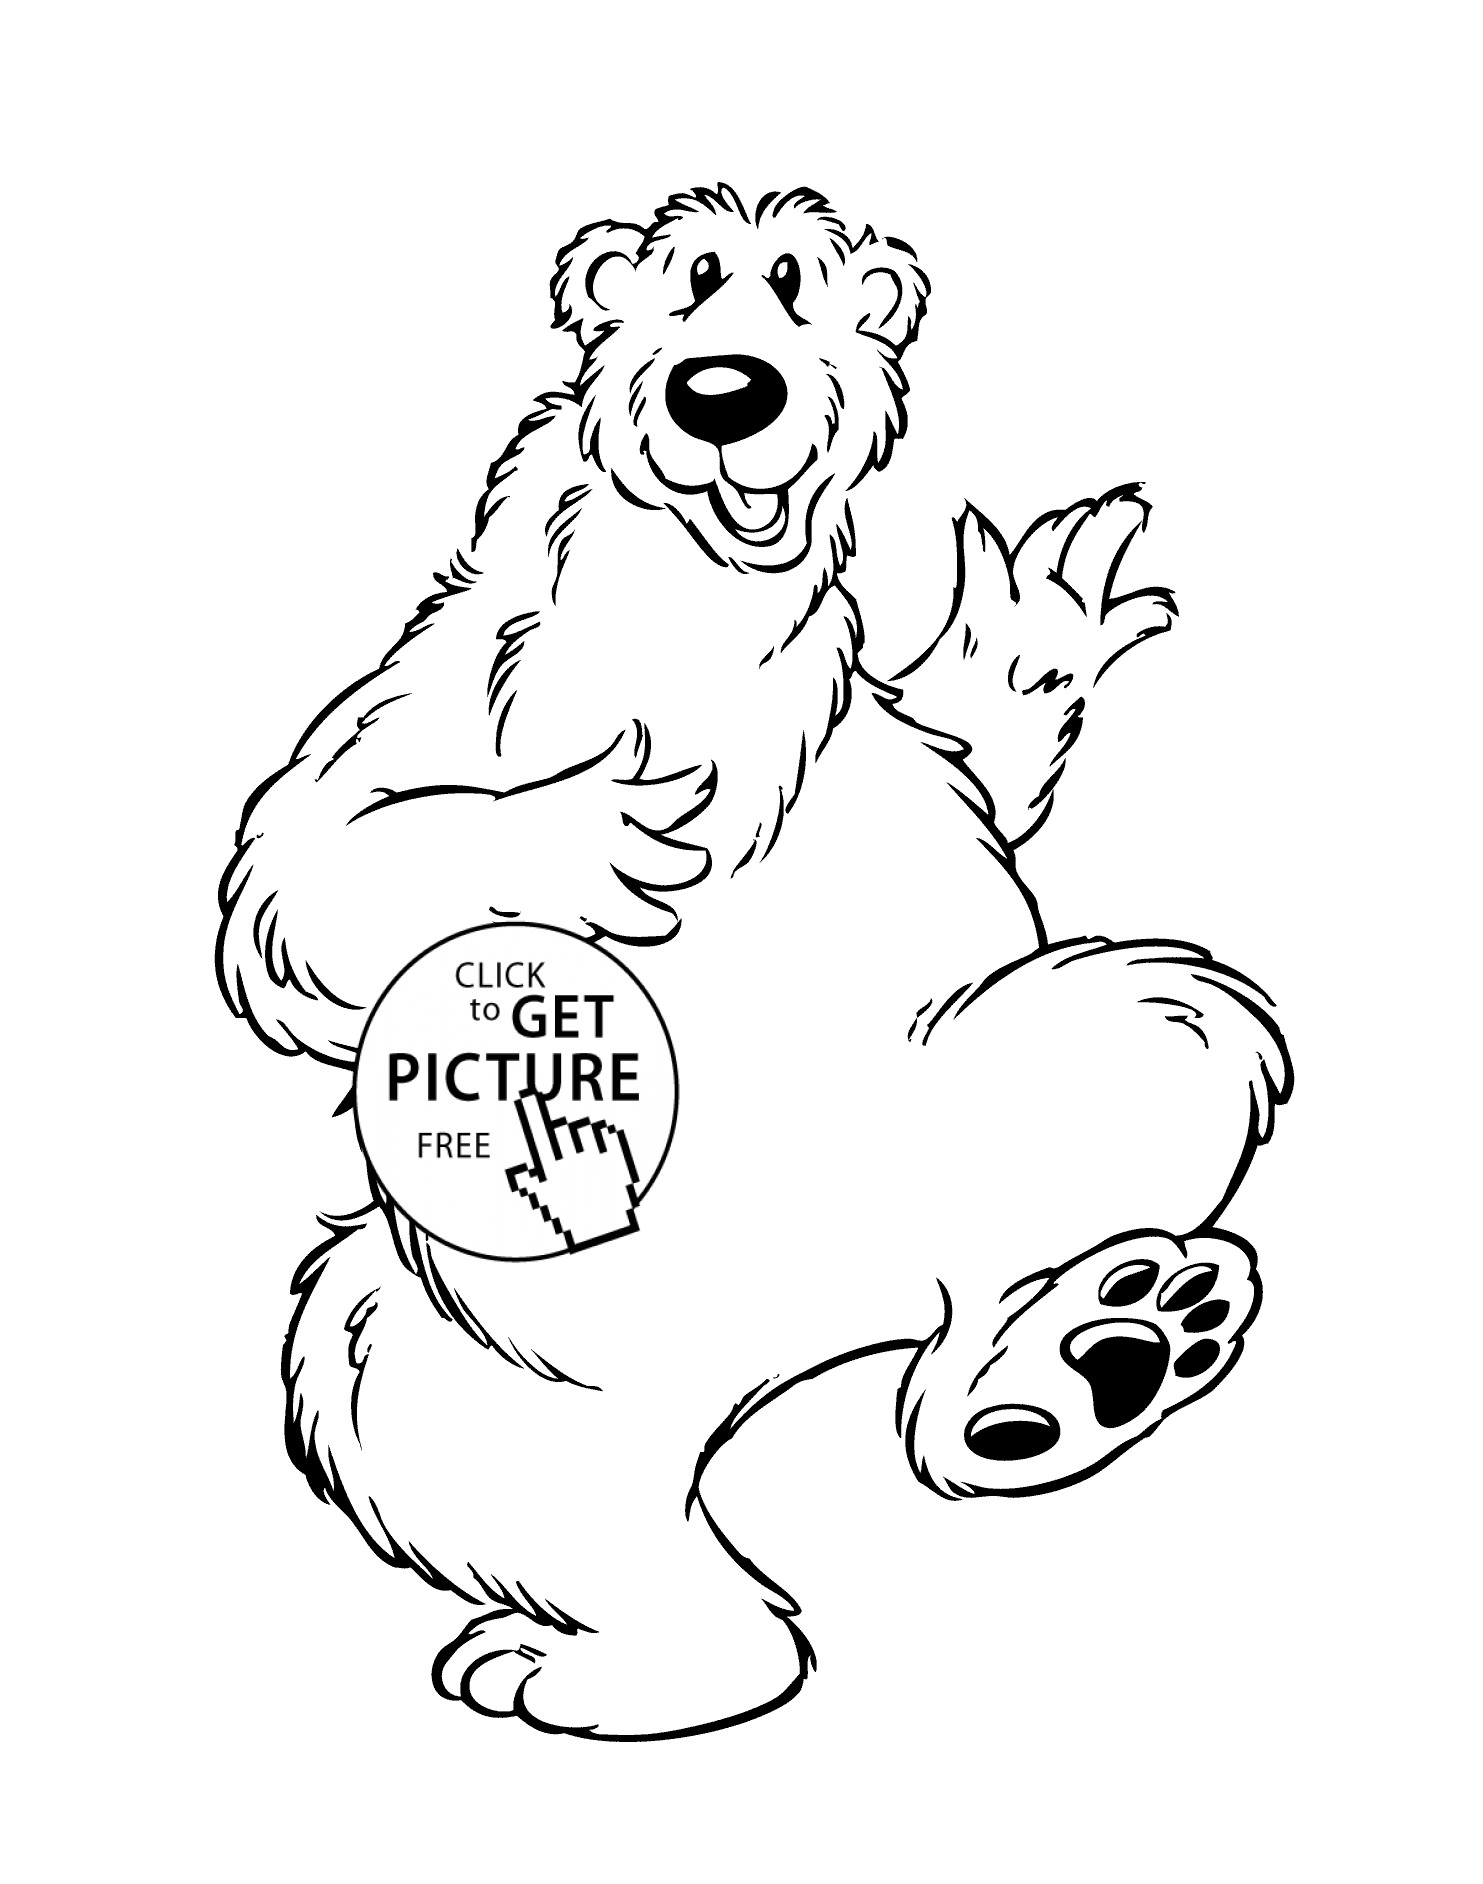 Bear Coloring Pages For Kids
 Funny bear cartoon animals coloring pages for kids